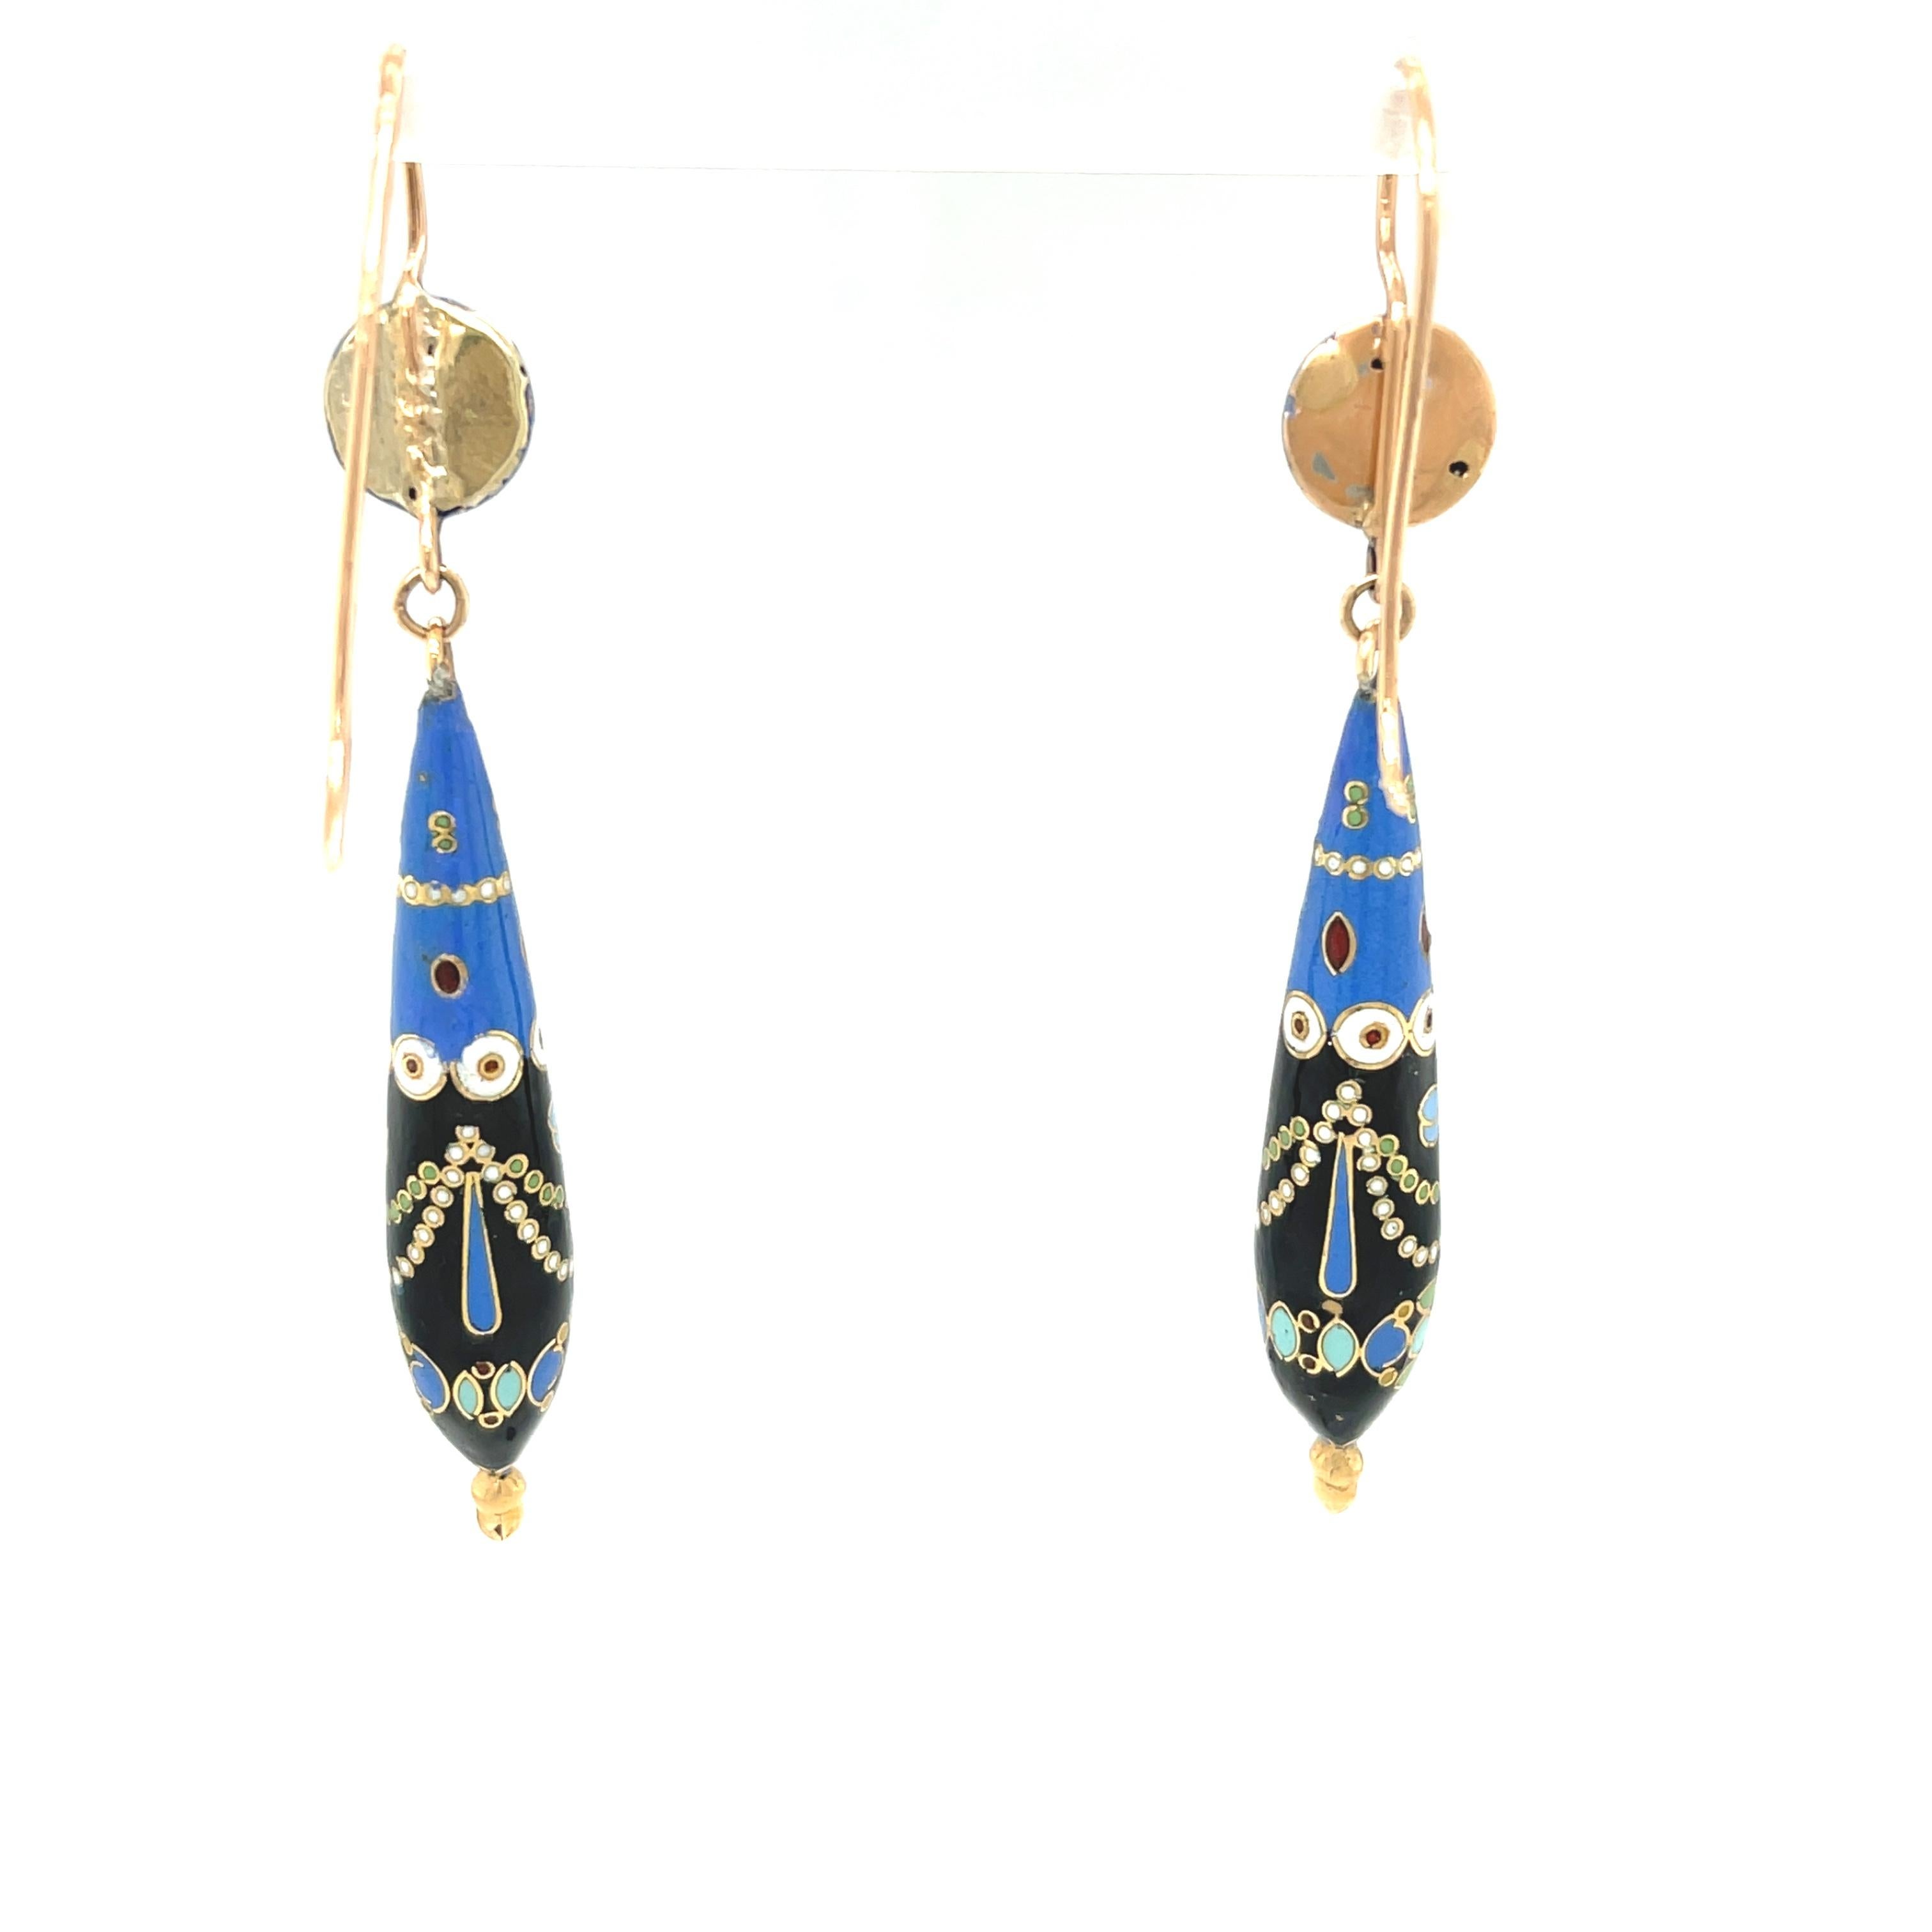 Antique Victorian 14k gold blue enamel dart earrings circa 1900. These charming Swiss enamel style blue white and black enamel dart earrings are unique in style and color combination. The dart pendants are suspended from a half bead top and the